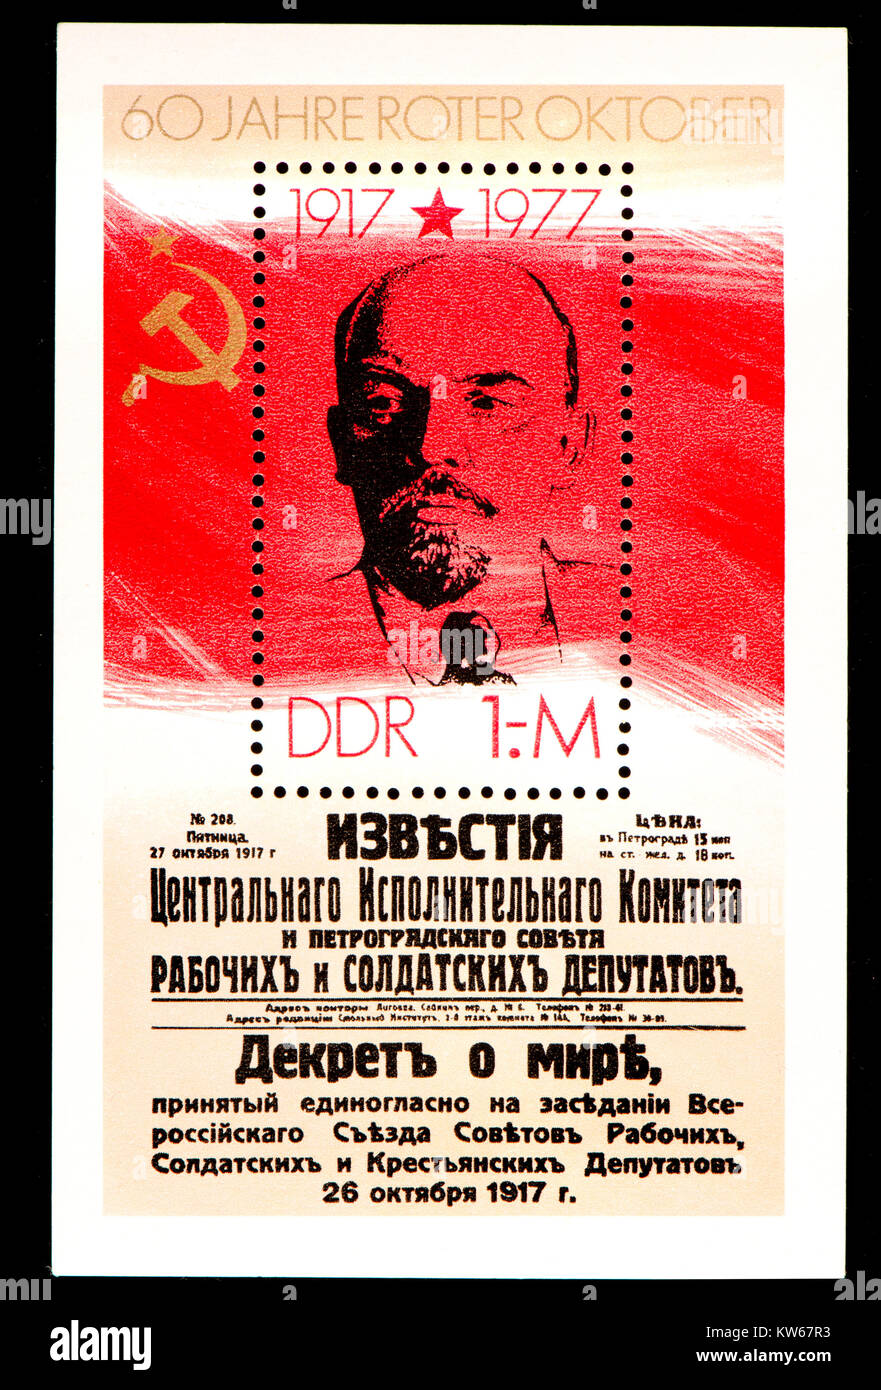 East German (DDR) postage stamp (1977): 60th anniversary of the October Revolution / Red October - Lenin Stock Photo